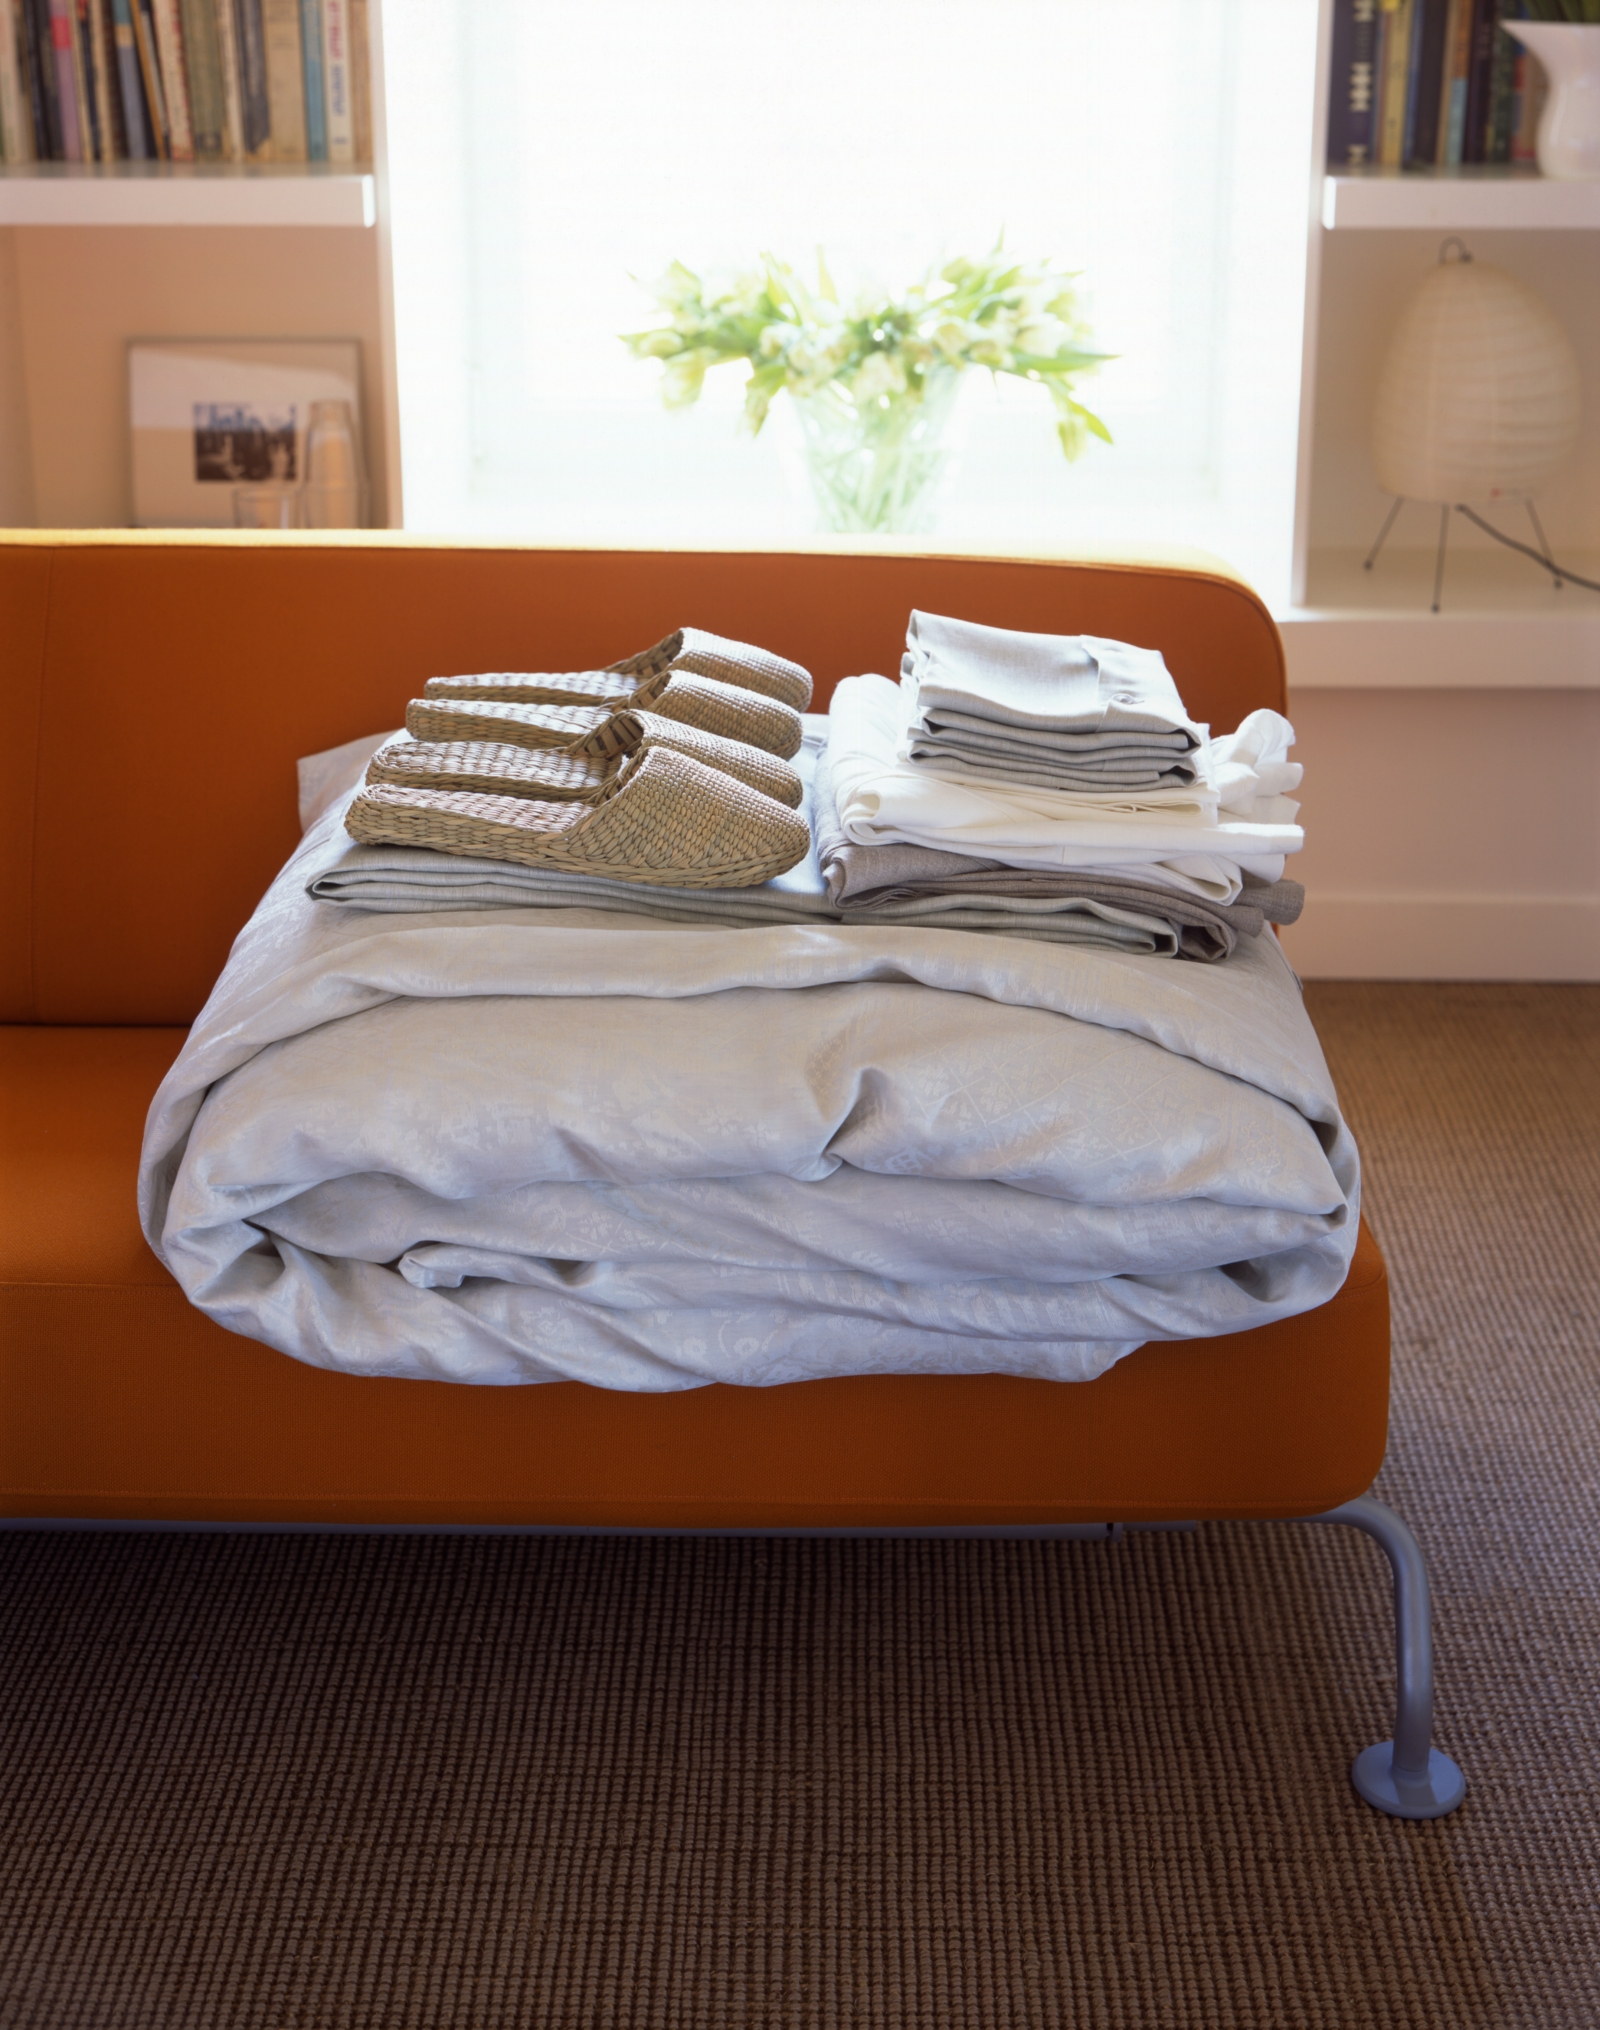 Image of sofa bed